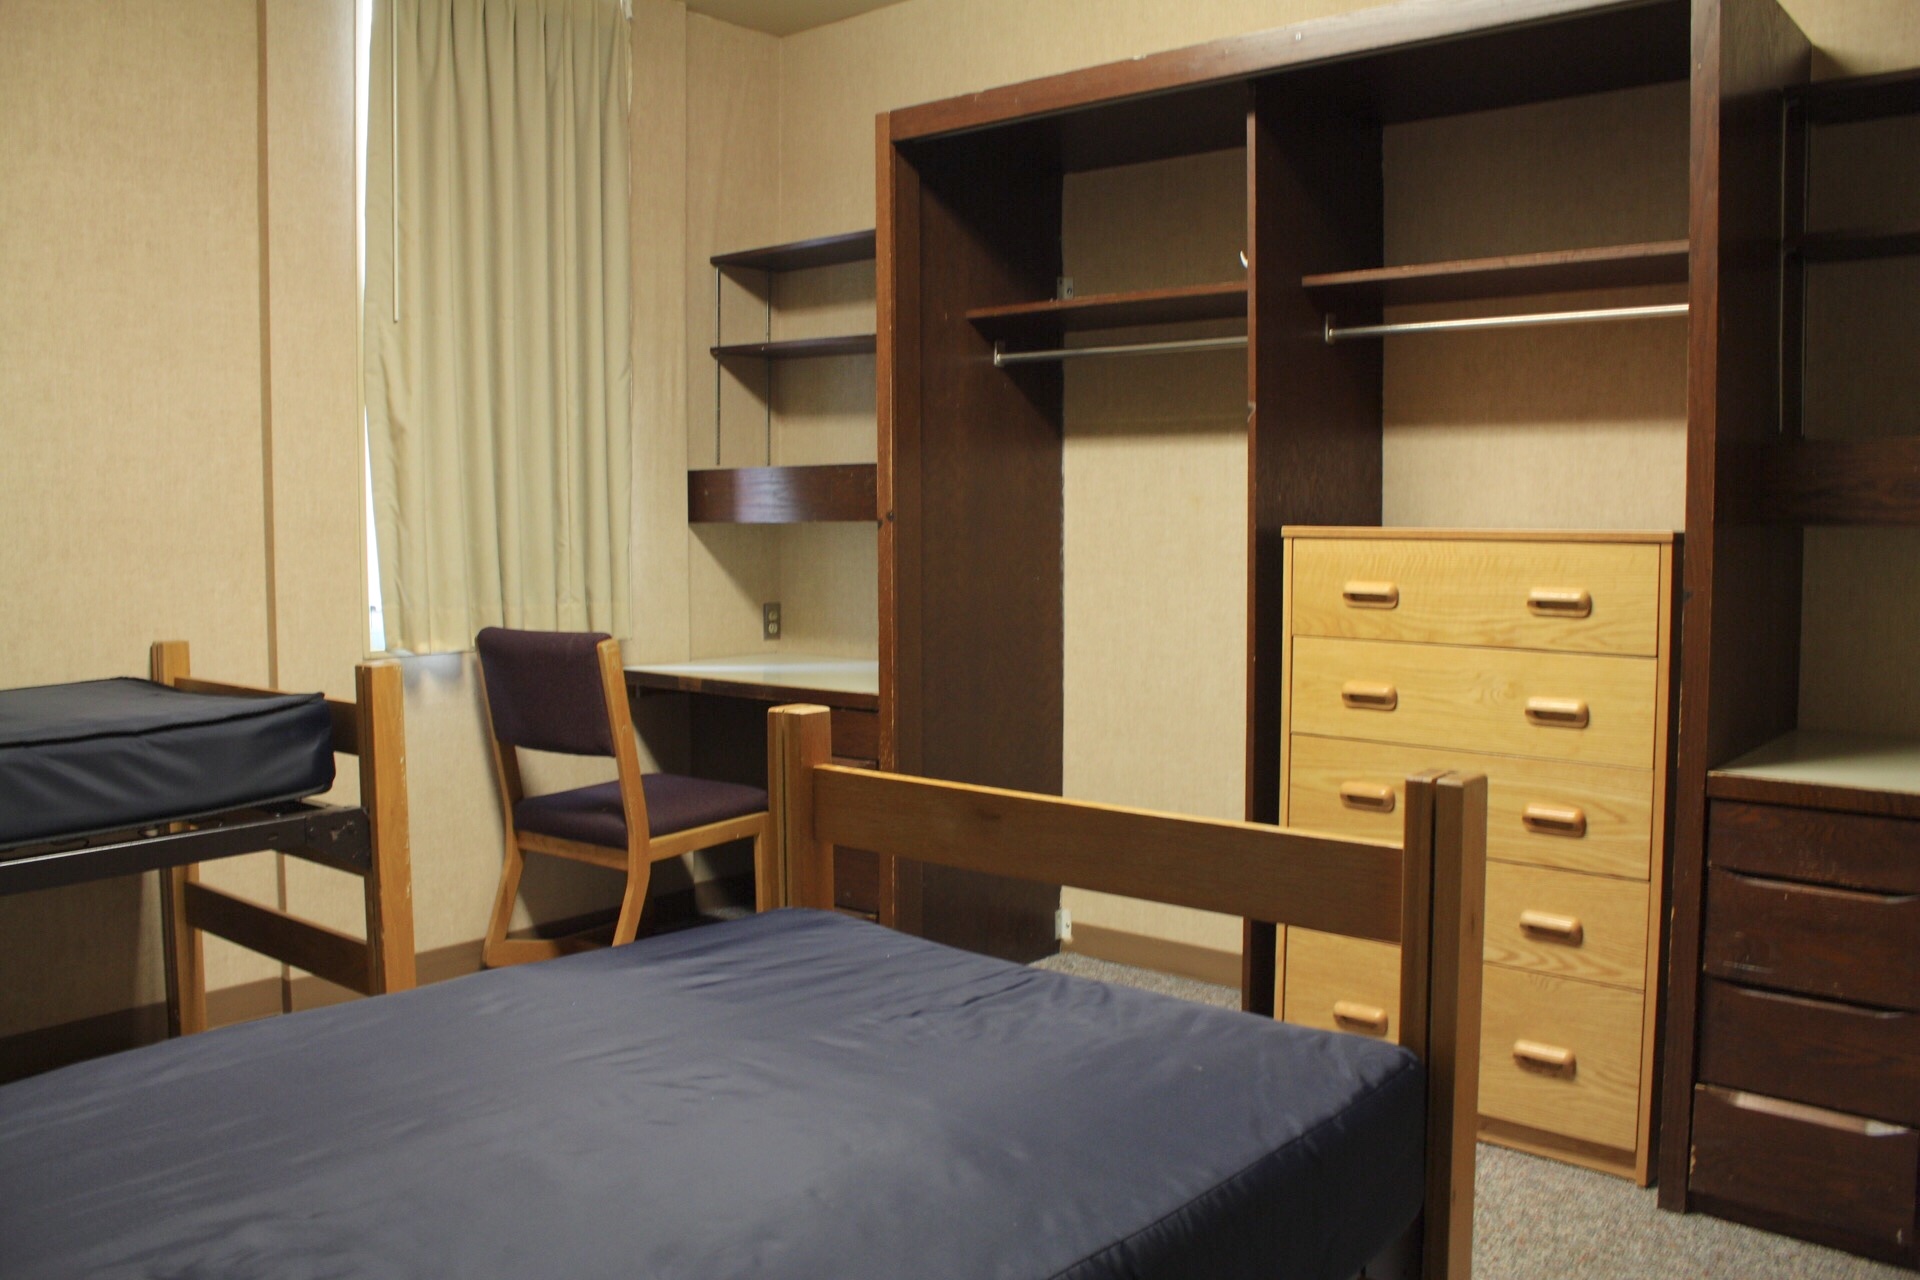 Centennial Complex with 2 bed frames, mattresses, a chair, a tall dresser, clothing hanging areas and shelves.